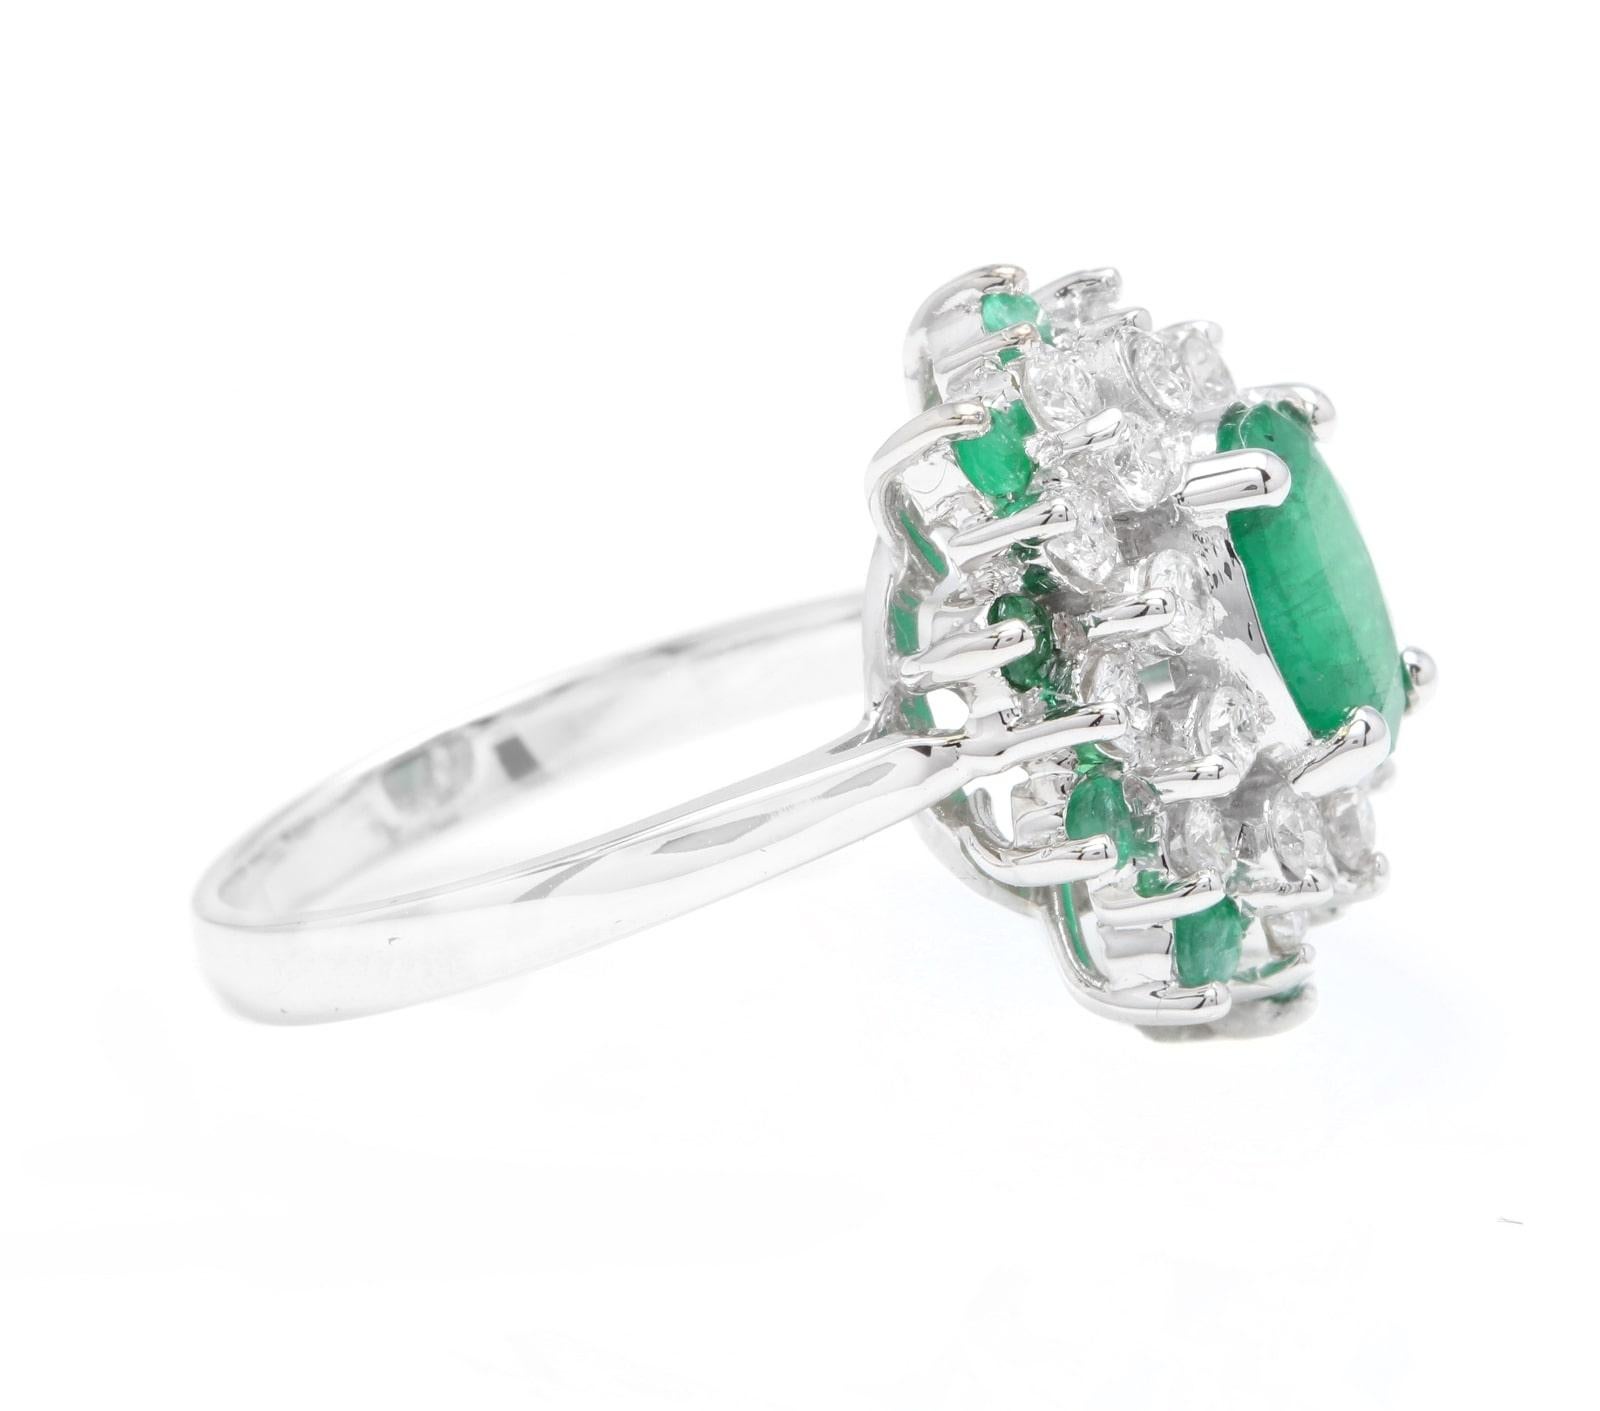 Emerald Cut 3.30 Carat Exquisite Emerald and Diamond 14 Karat Solid White Gold Ring For Sale